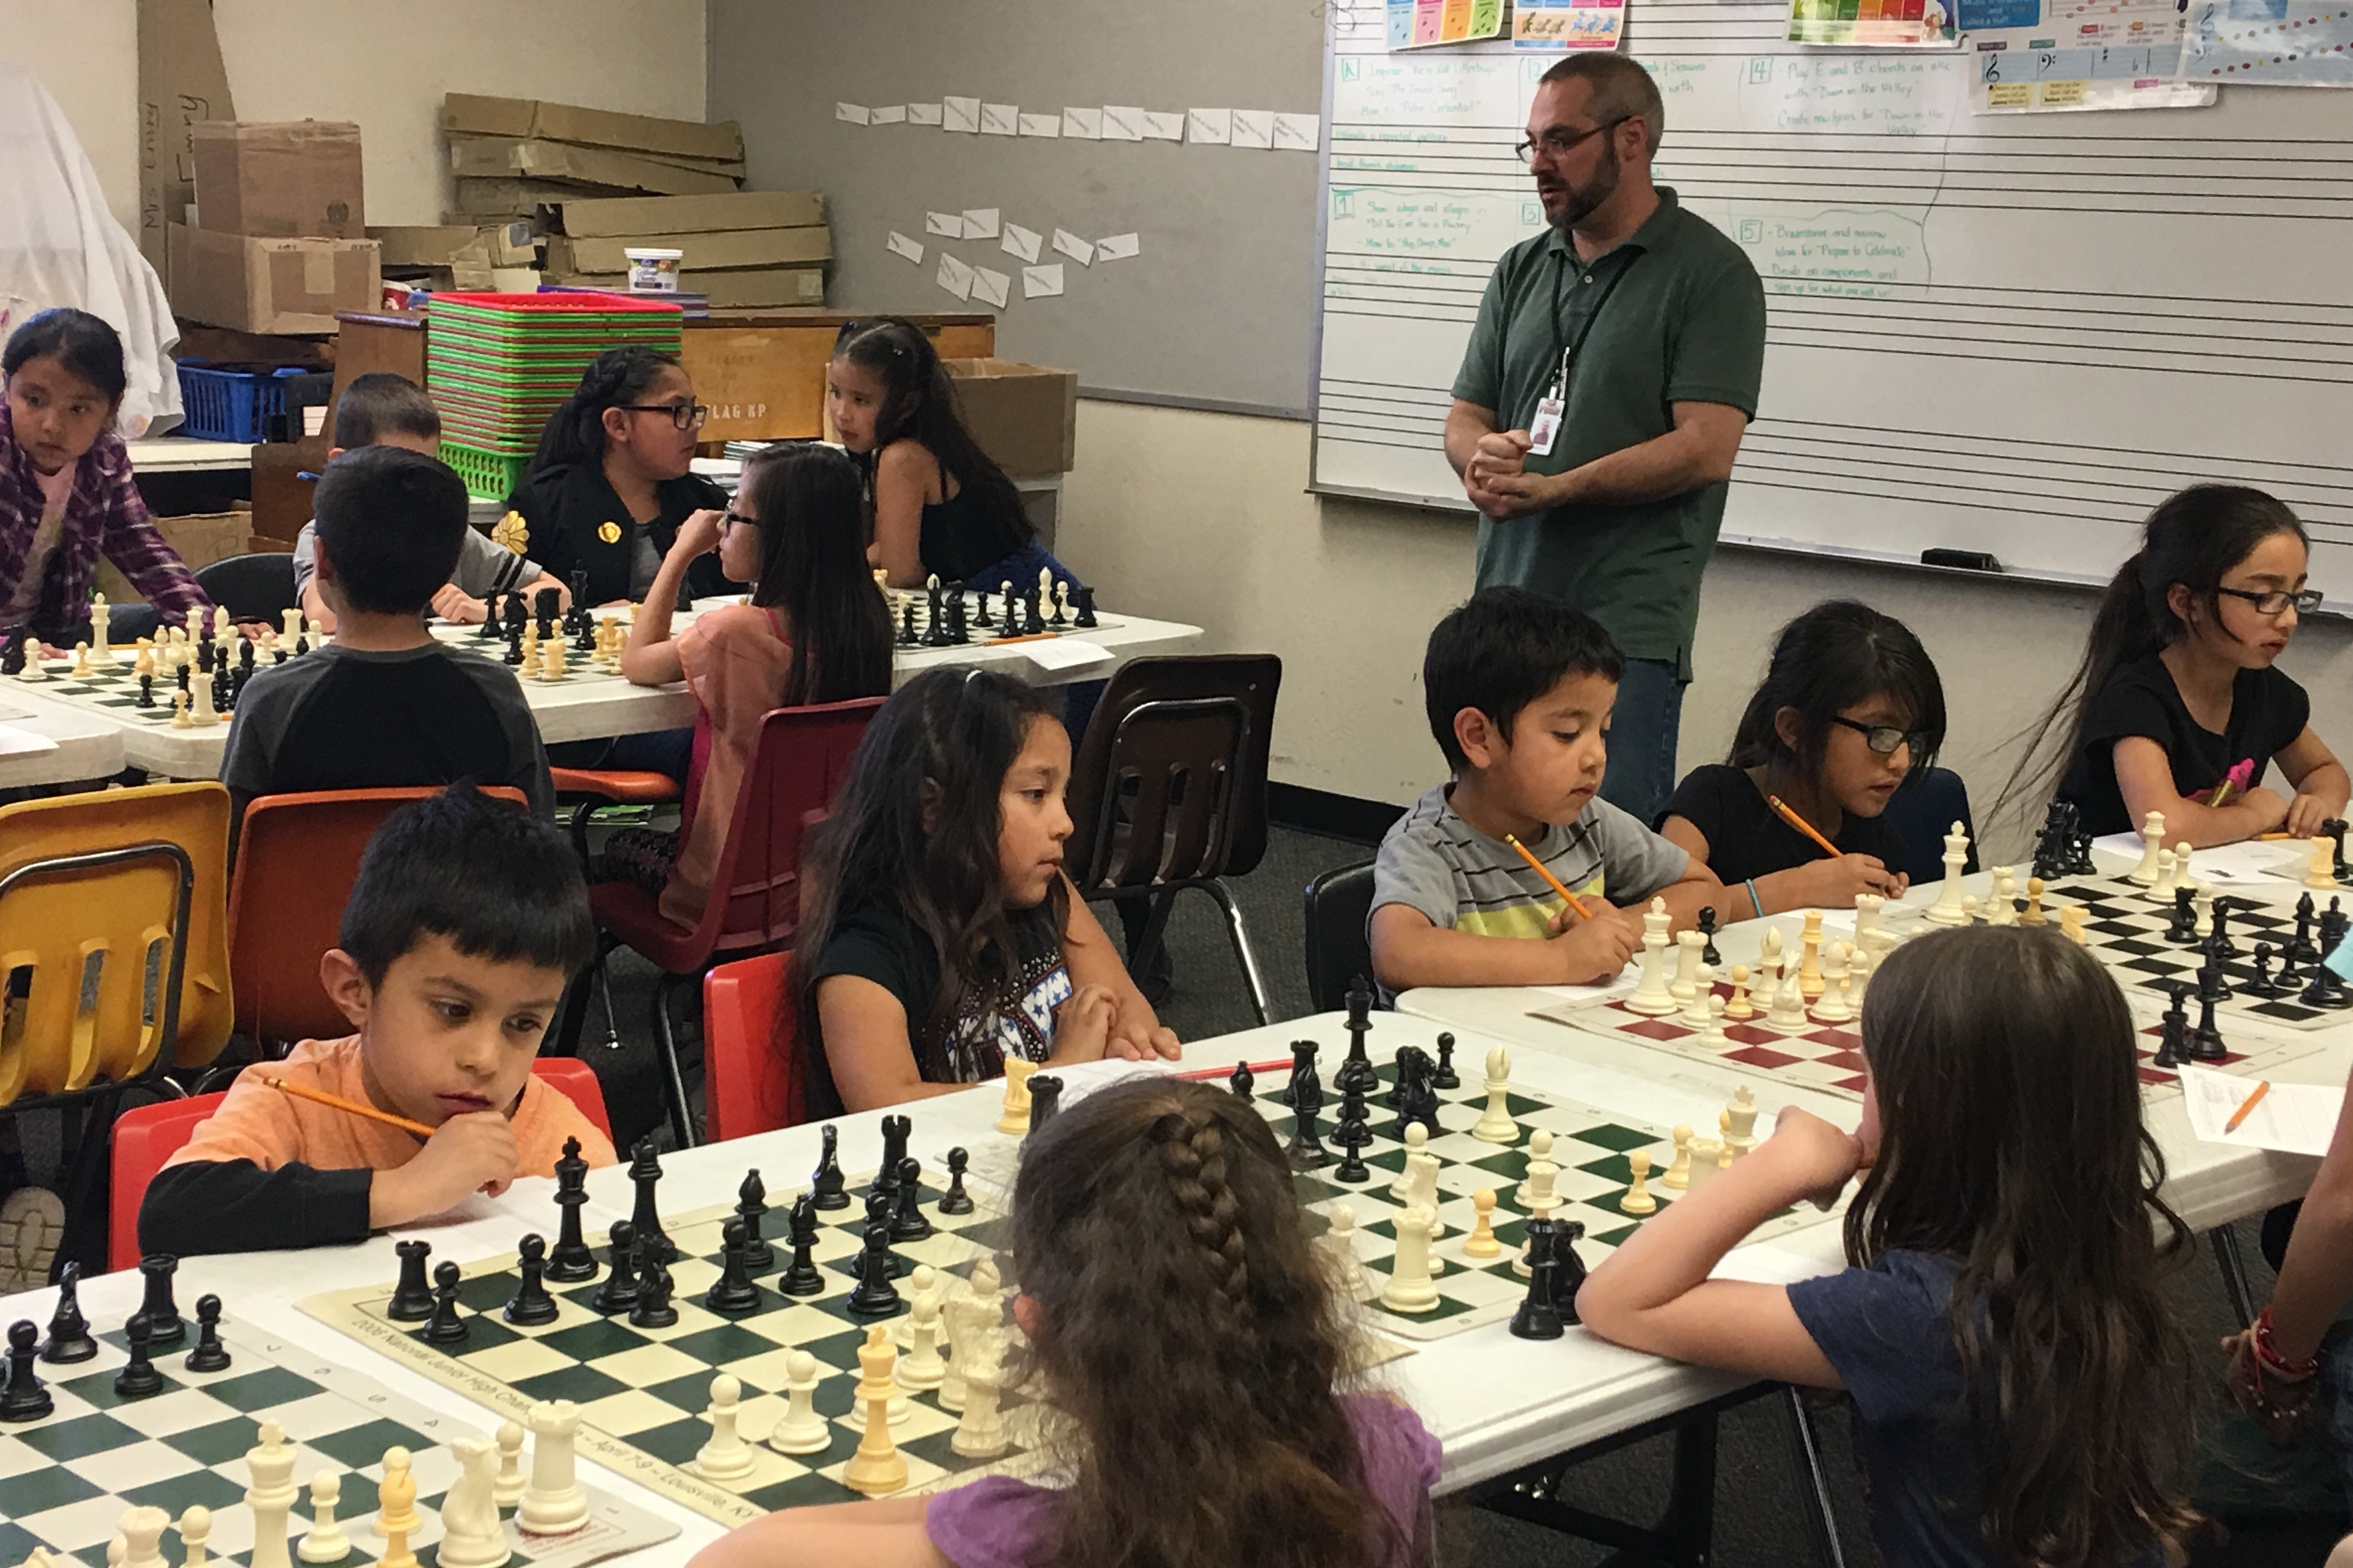 Coach Ted Komada motivates his chess team in preparation for the SuperNationals of chess, this week in Nashville, Tenn. (Photo by Laurel Morales/Fronteras)